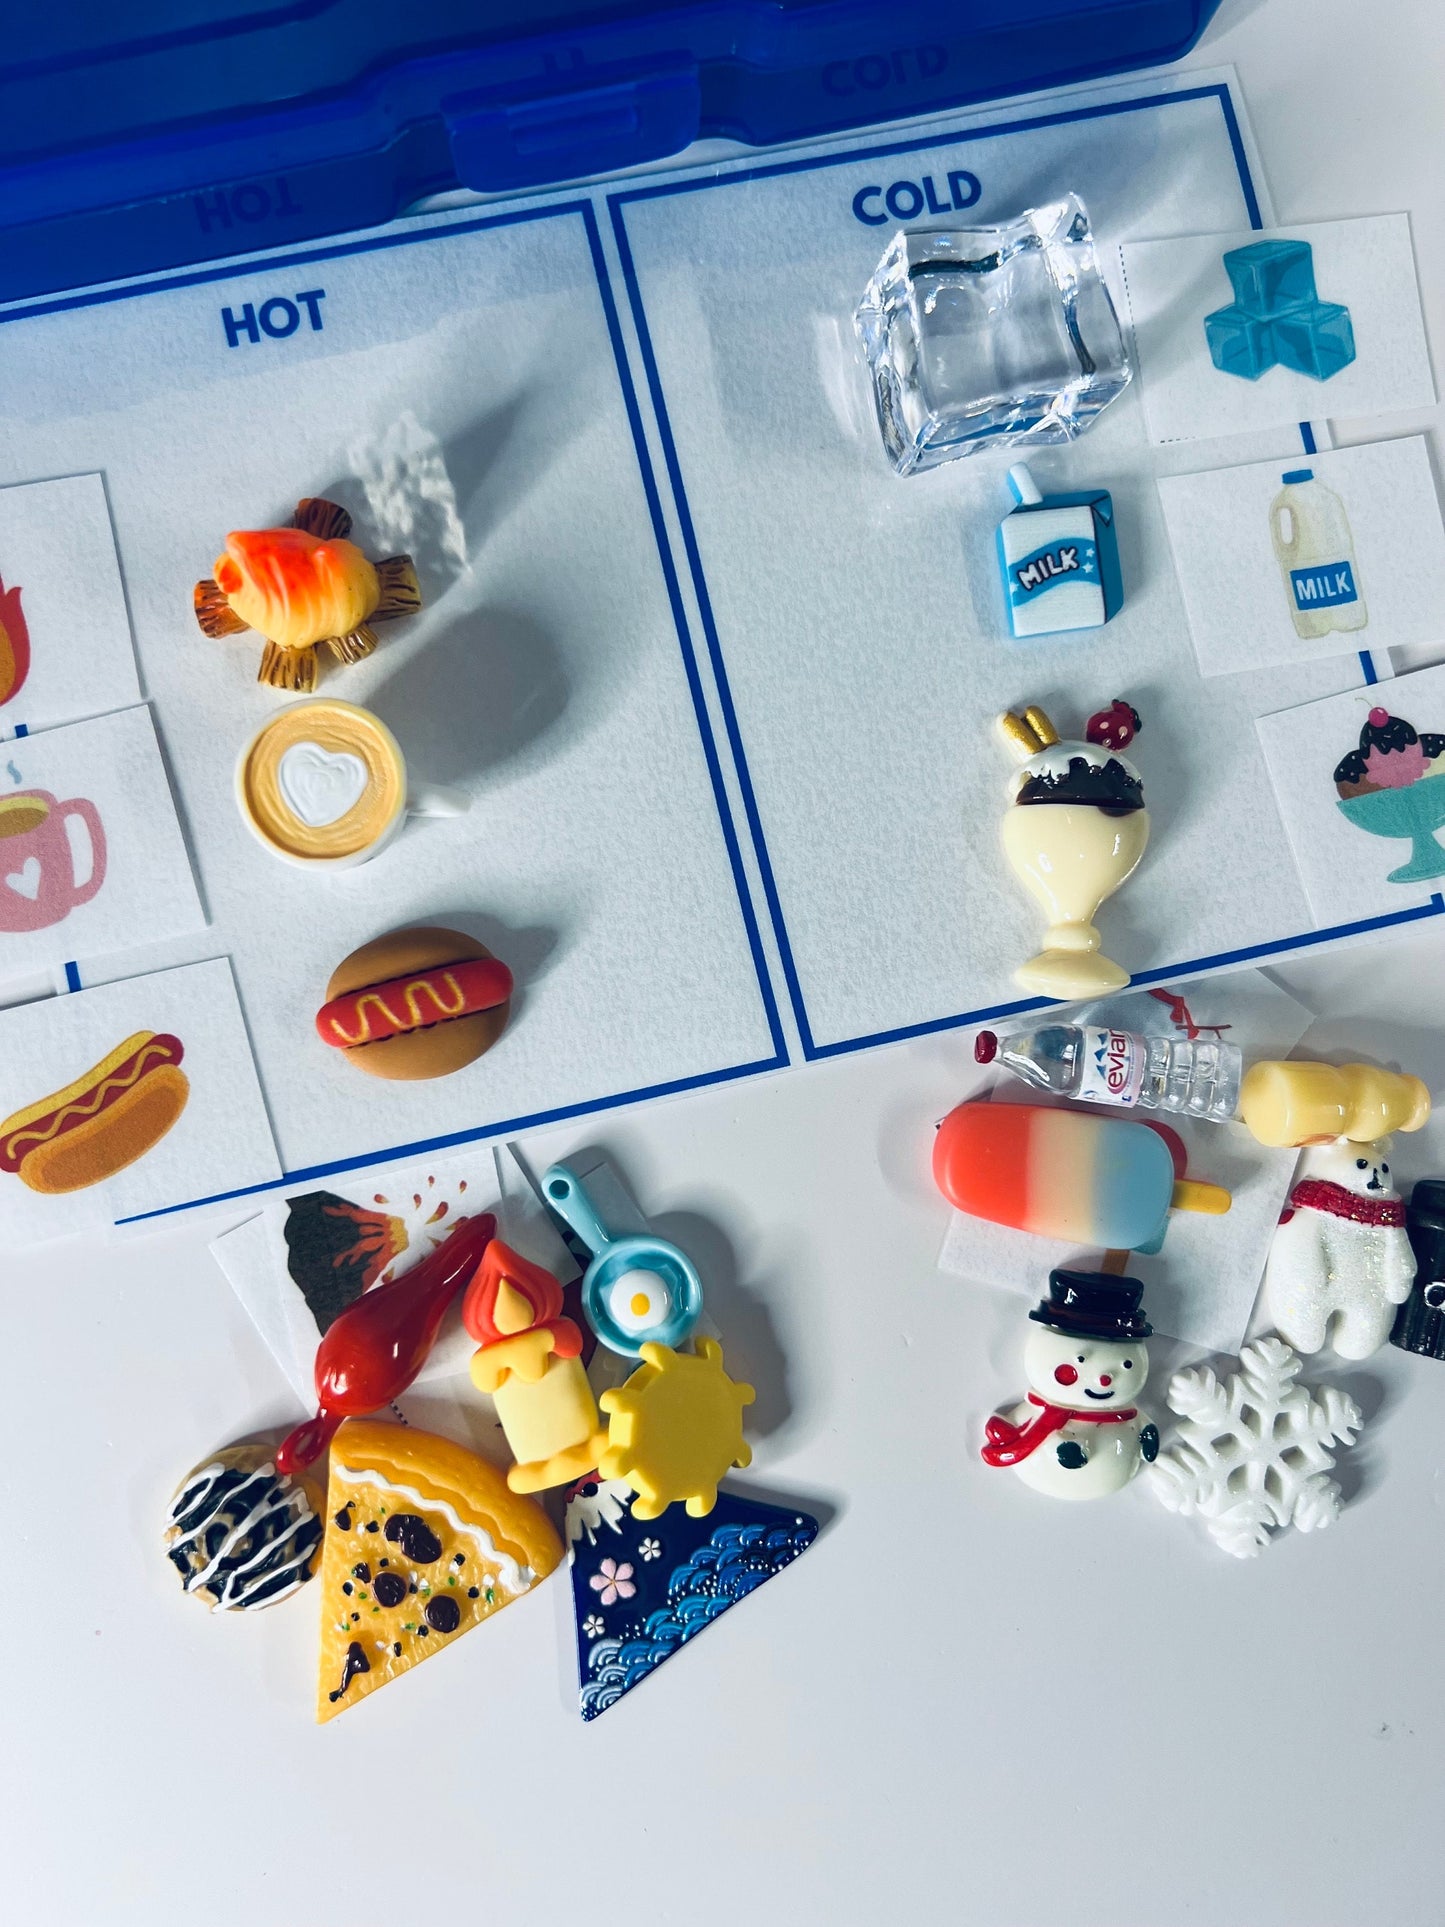 TEMPERATURE Preschool SCIENCE Sort Hot Cold  Task Box with Mini Objects and Pictures - Miniature Objects - Speech Therapy Task Box